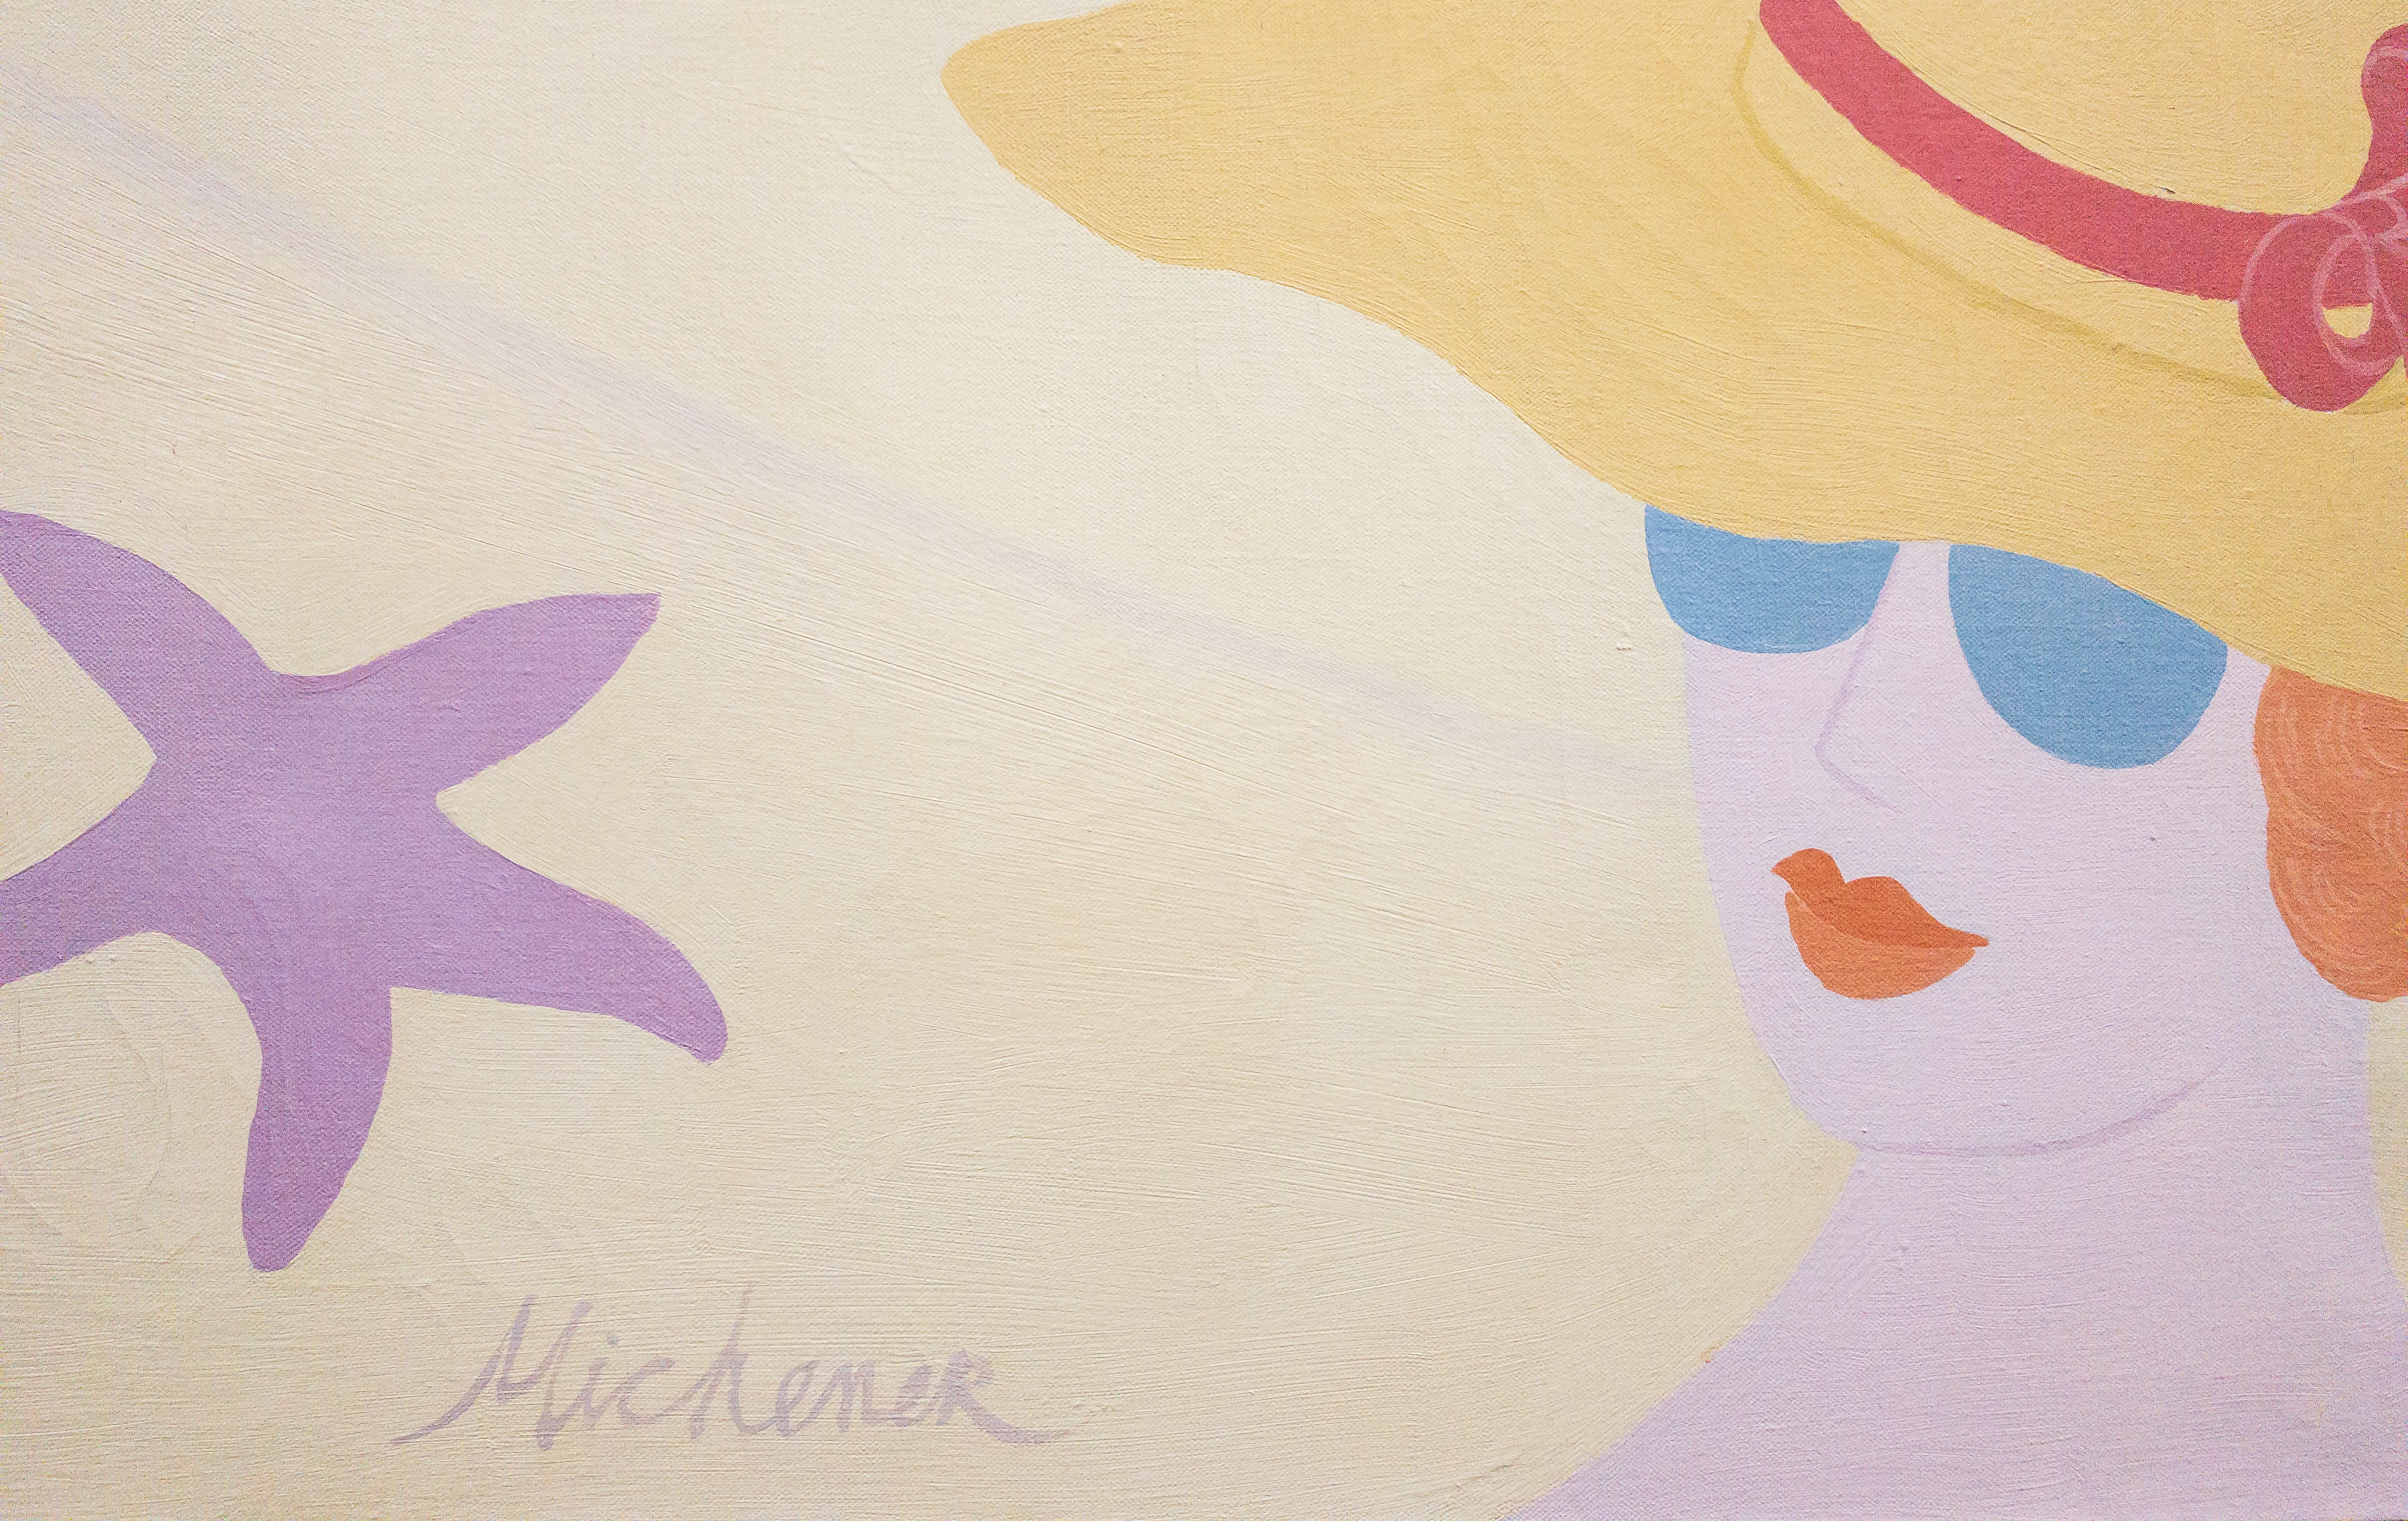 Close up of artist signature and woman in sun hat. Robert Michener painting 'The Good Old Days Were Never Like This'